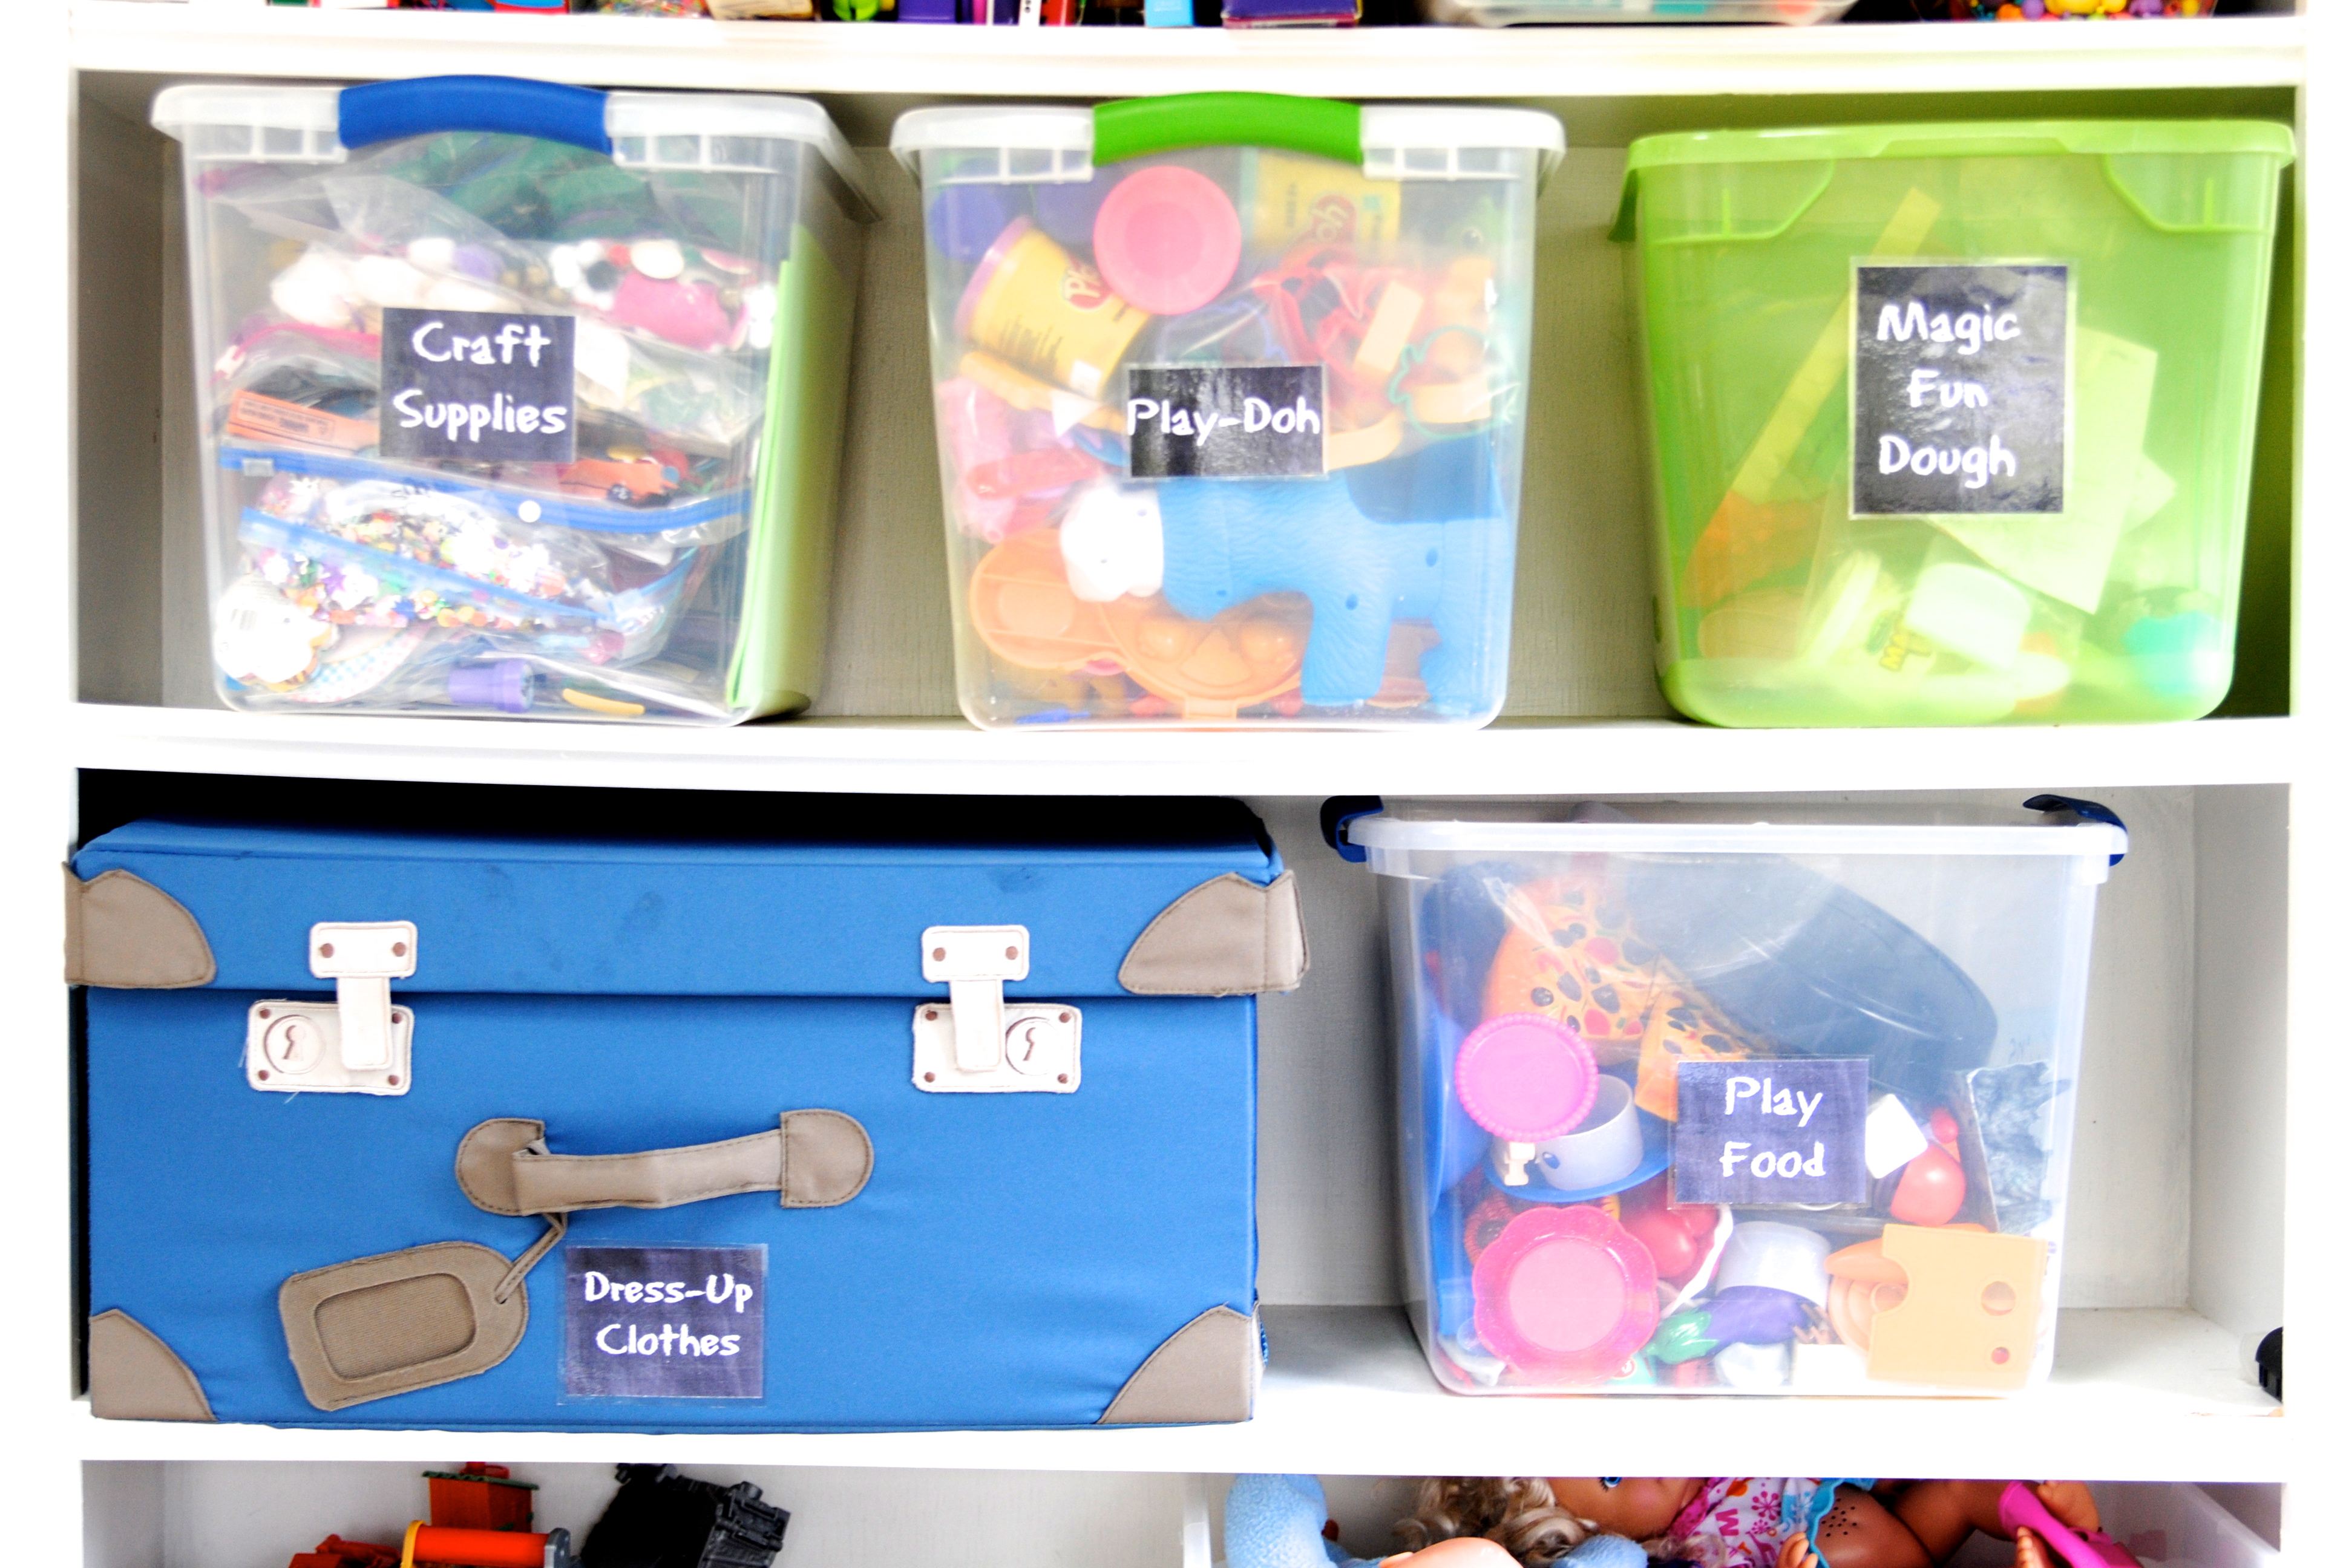 How to Organize and Tame Toys! Practical steps and clever ideas for toy organization to declutter and simplify your life!